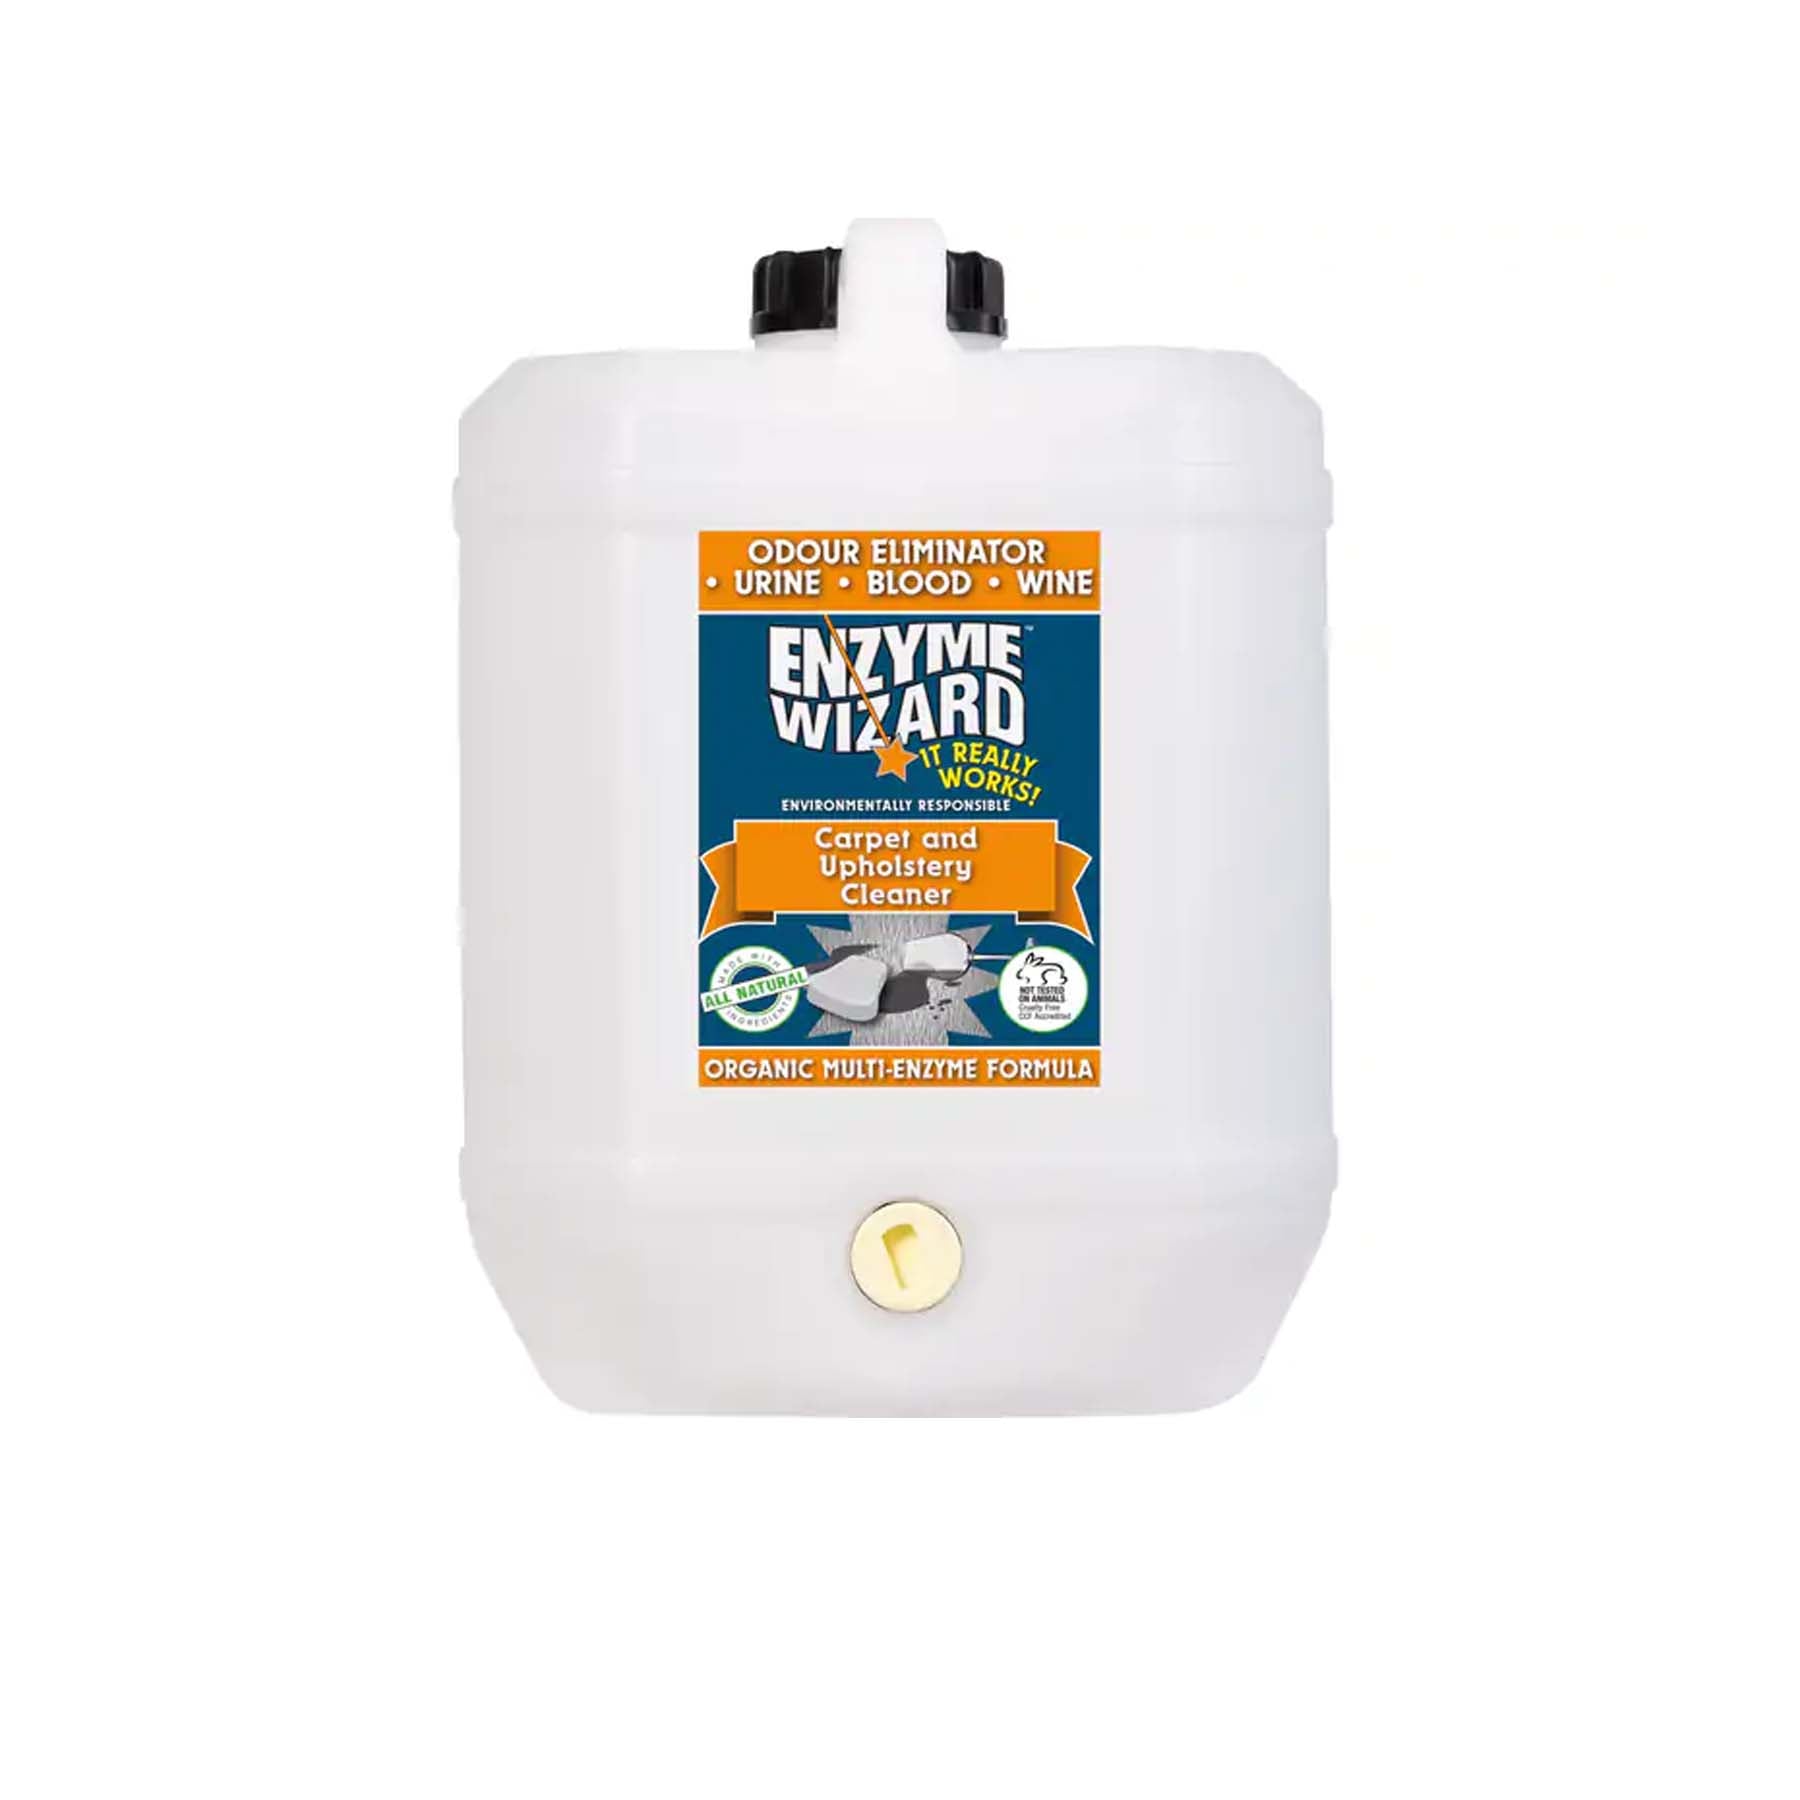 ENZYME WIZARD CARPET & UPHOLSTERY CLEANER 10L